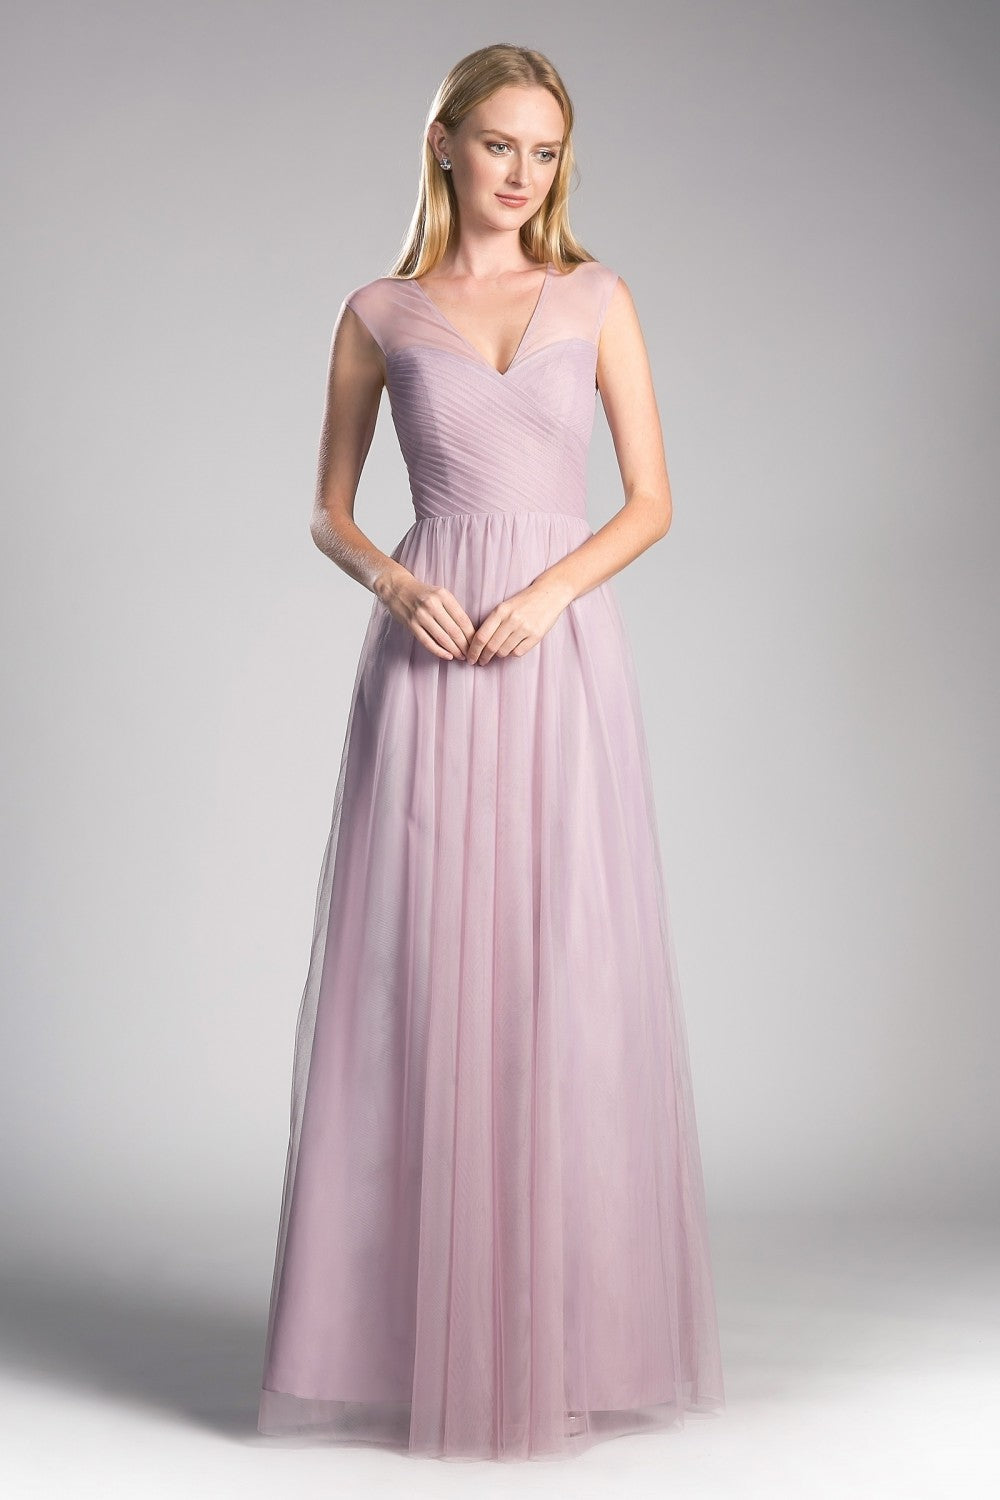 Layered Tulle A-Line Pleated Bodice Illusion Cap Sleeves Long Bridesmaid Gown CDET320 Sale Elsy Style Bridesmaid Dress